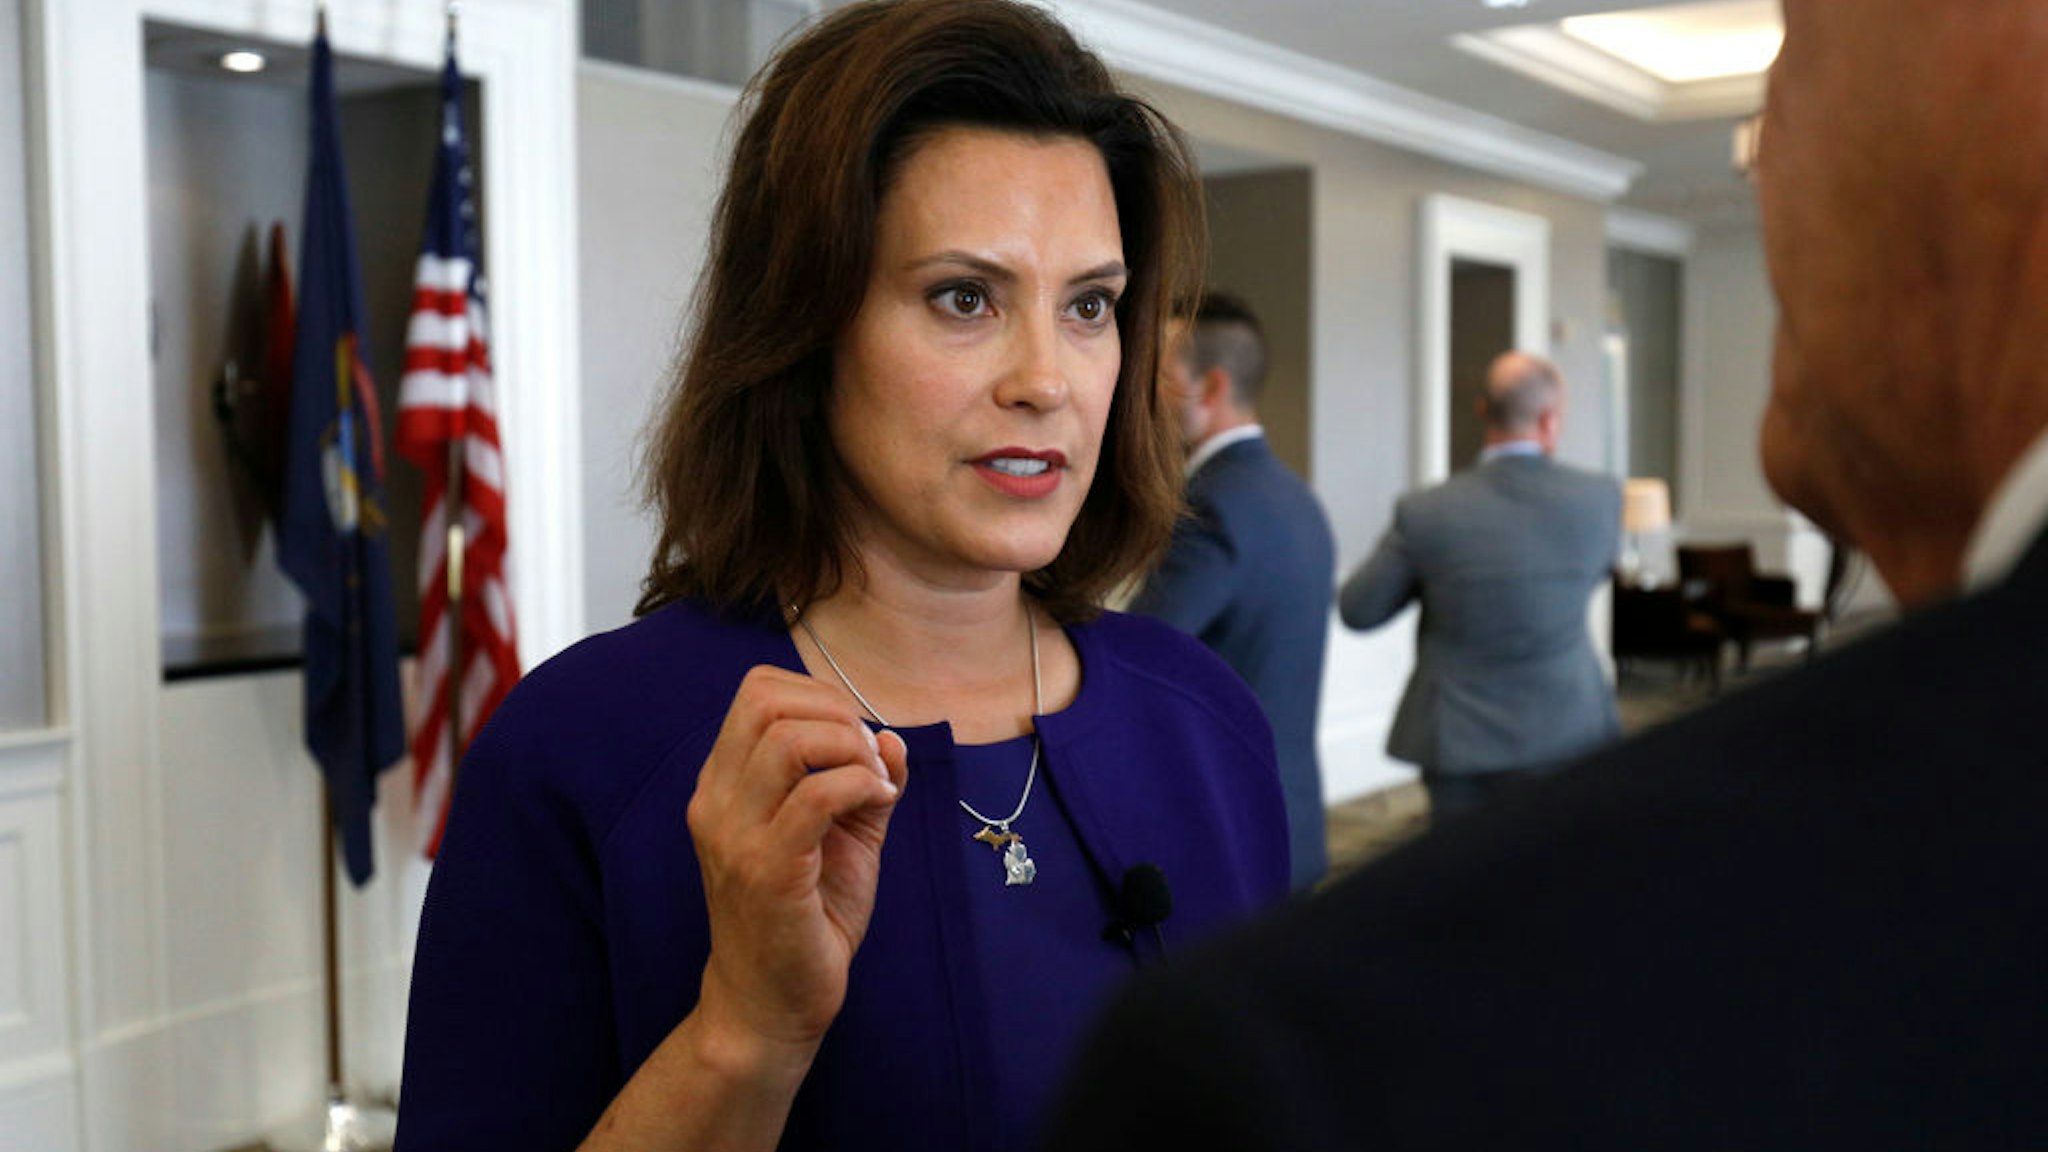 DETROIT, MI - AUGUST 8: Gretchen Whitmer, Michigan Democratic gubernatorial nominee, speaks with a reporter after a Democrat Unity Rally at the Westin Book Cadillac Hotel August 8, 2018 in Detroit, Michigan. Whitmer will face off against Republican gubernatorial nominee Bill Schuette in November. (Photo by Bill Pugliano/Getty Images)